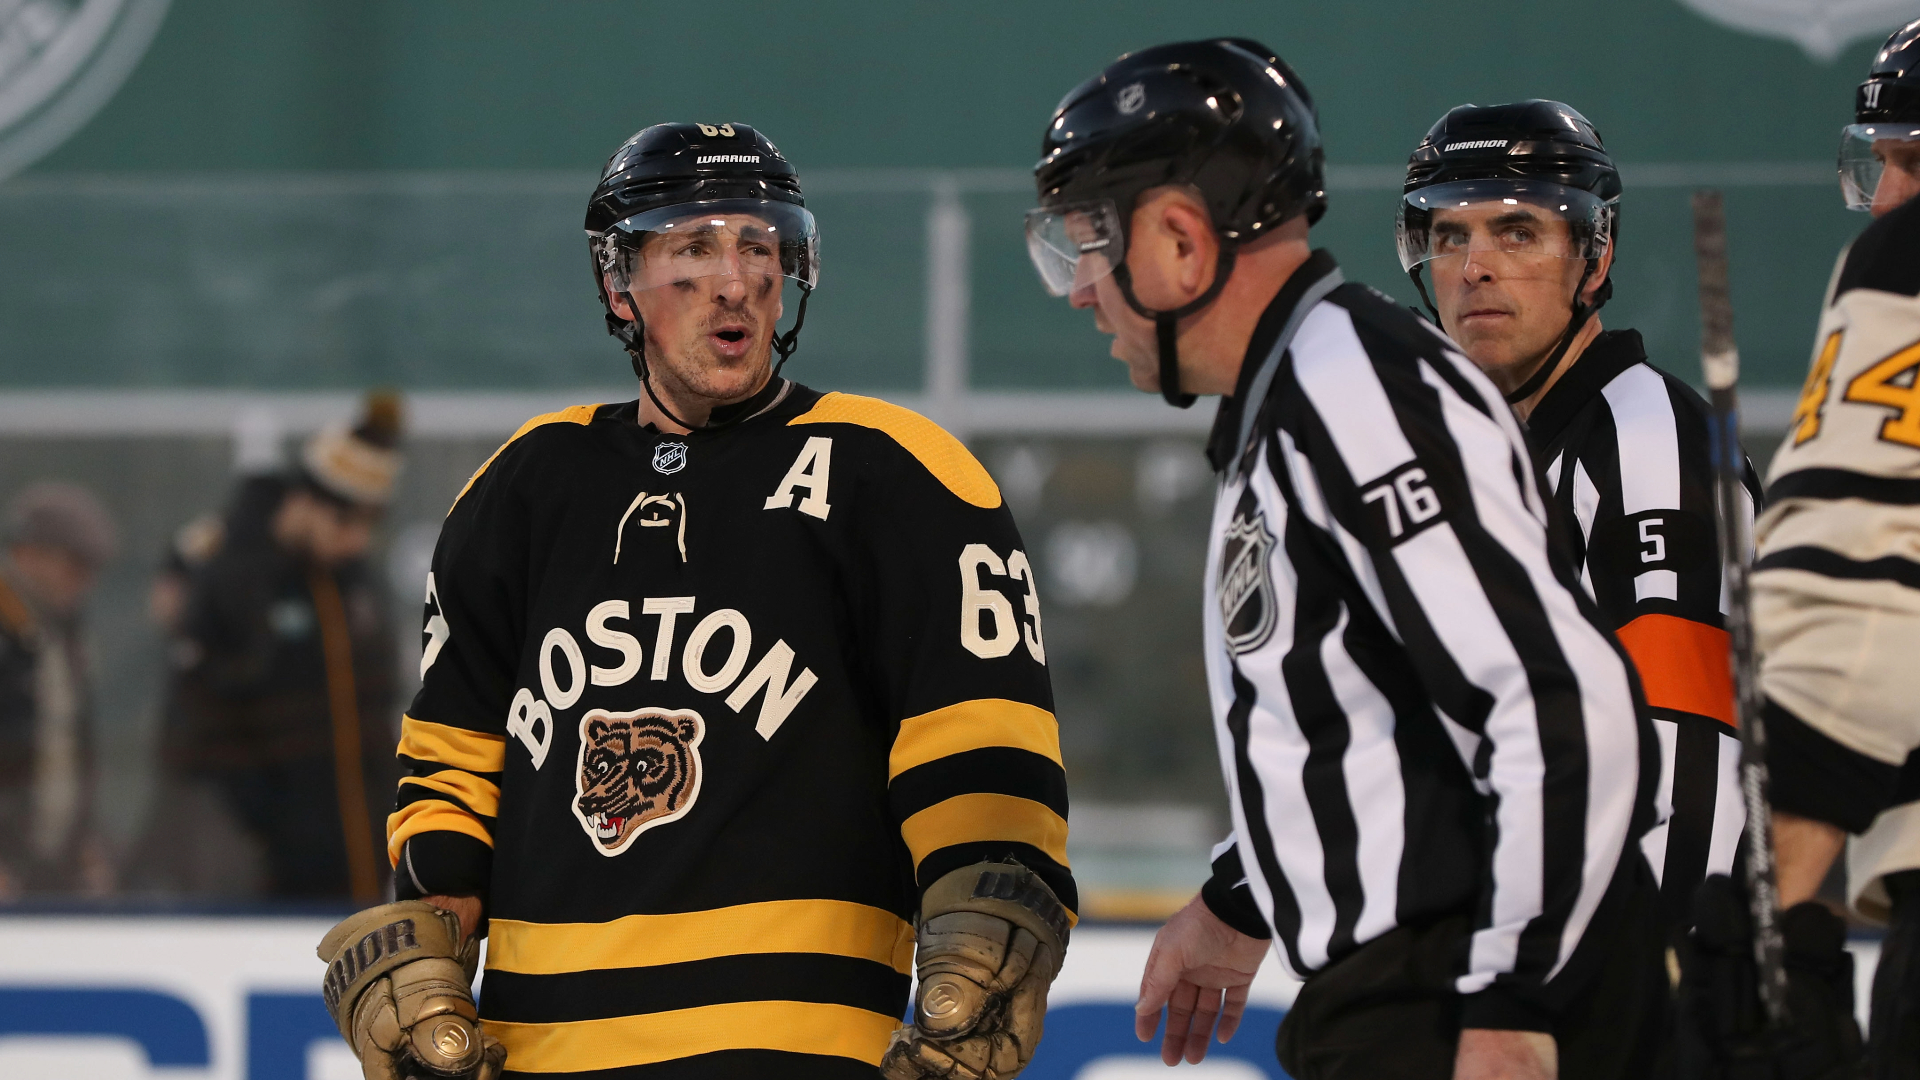 Boston Bruins: Brad Marchand selected to First All-Star Team